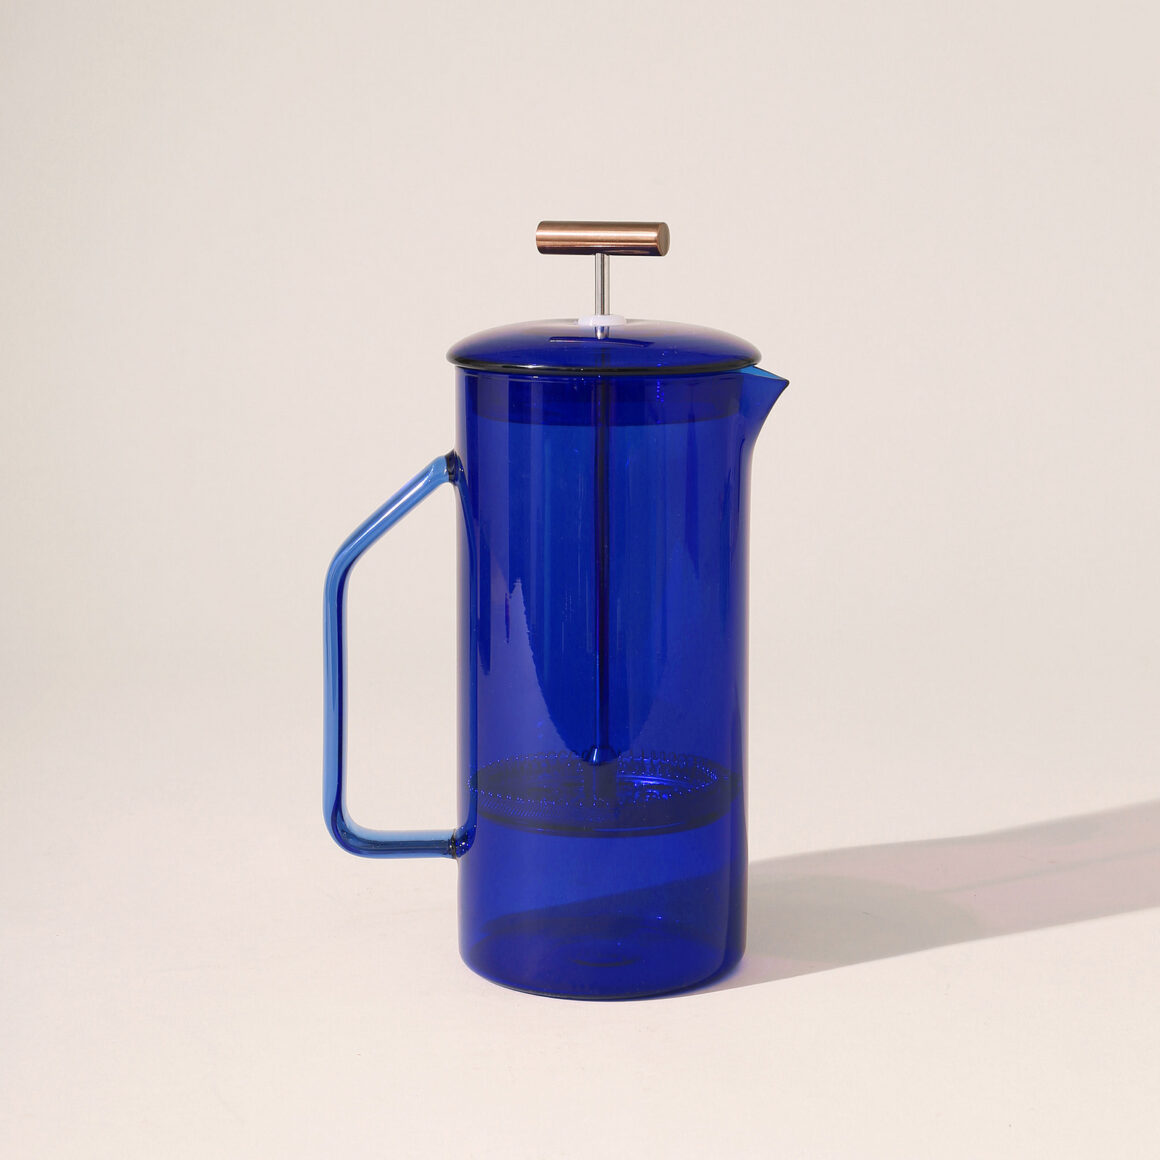 Most Aesthetically Pleasing Minimalist French Presses - Glass French Press